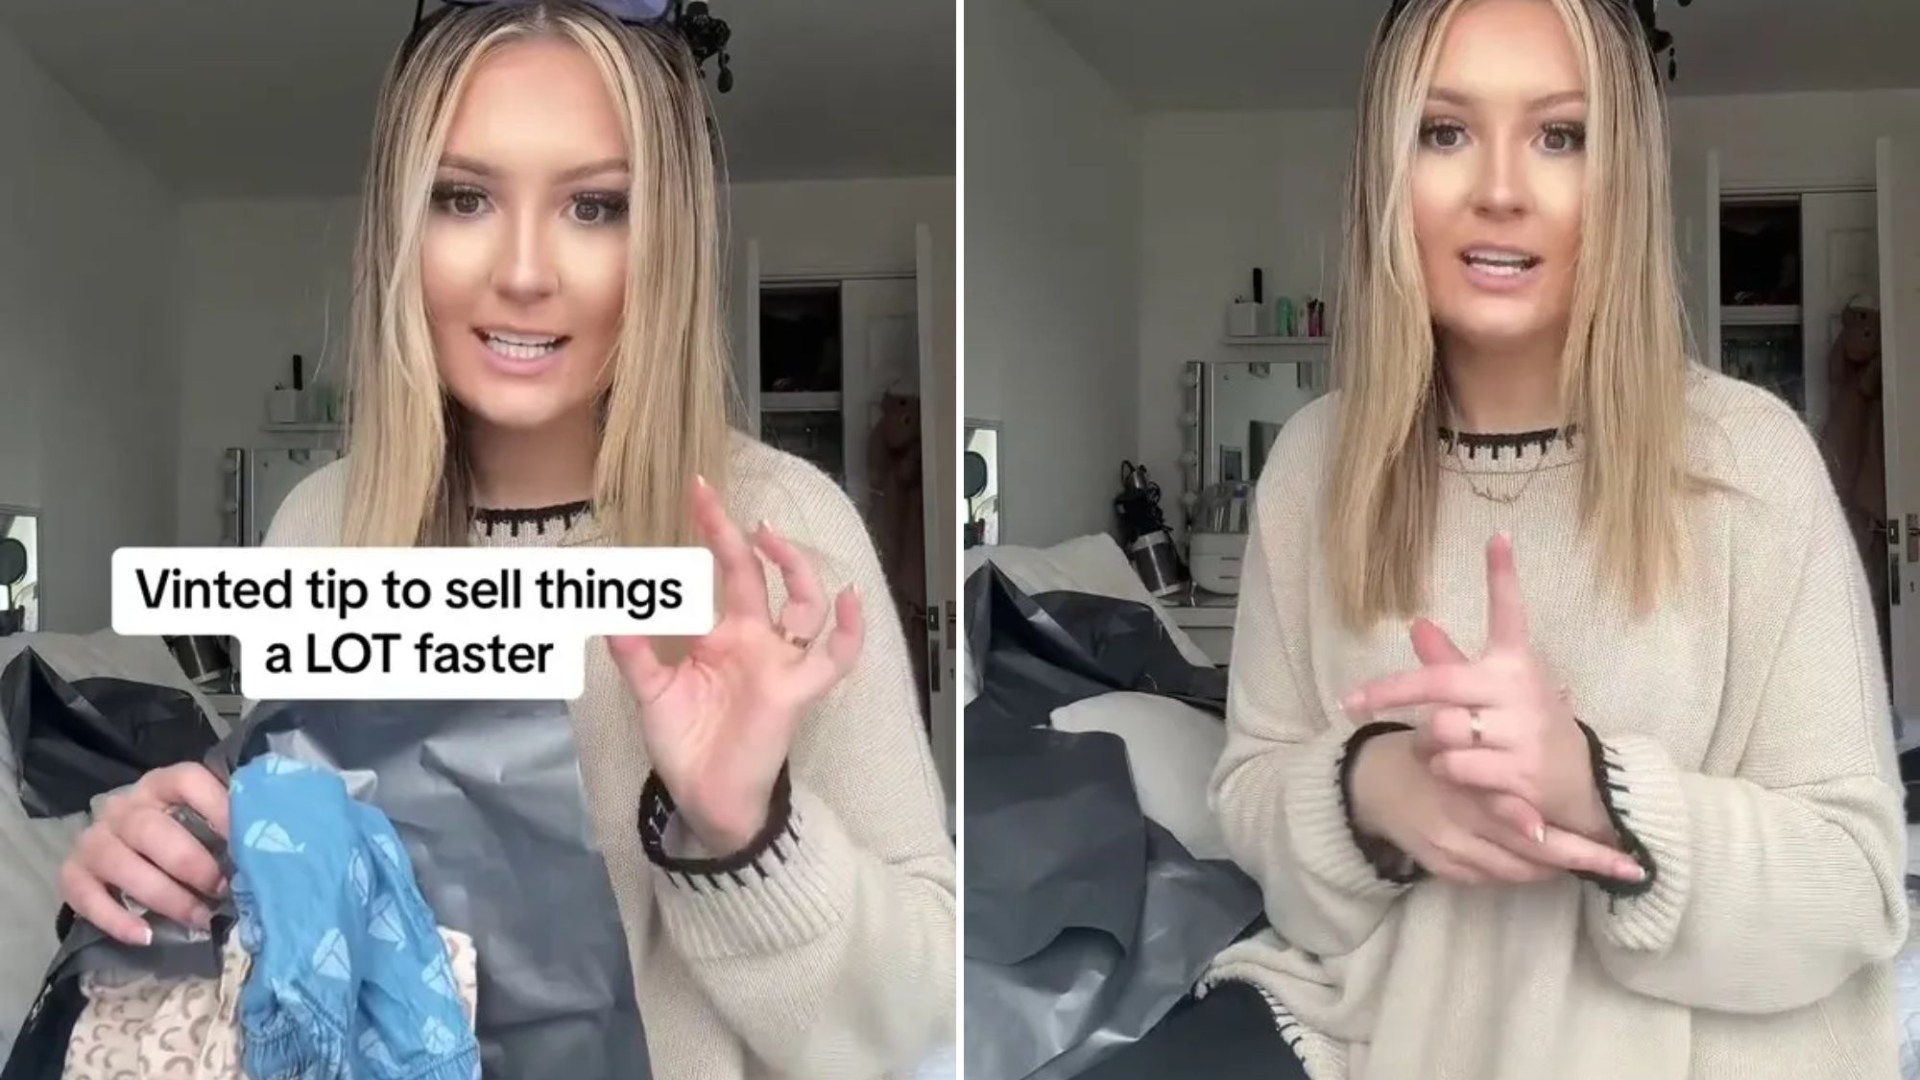 I’m a savvy mum – my easy hack will sell all your Vinted items, and save time while raking in cash [Video]